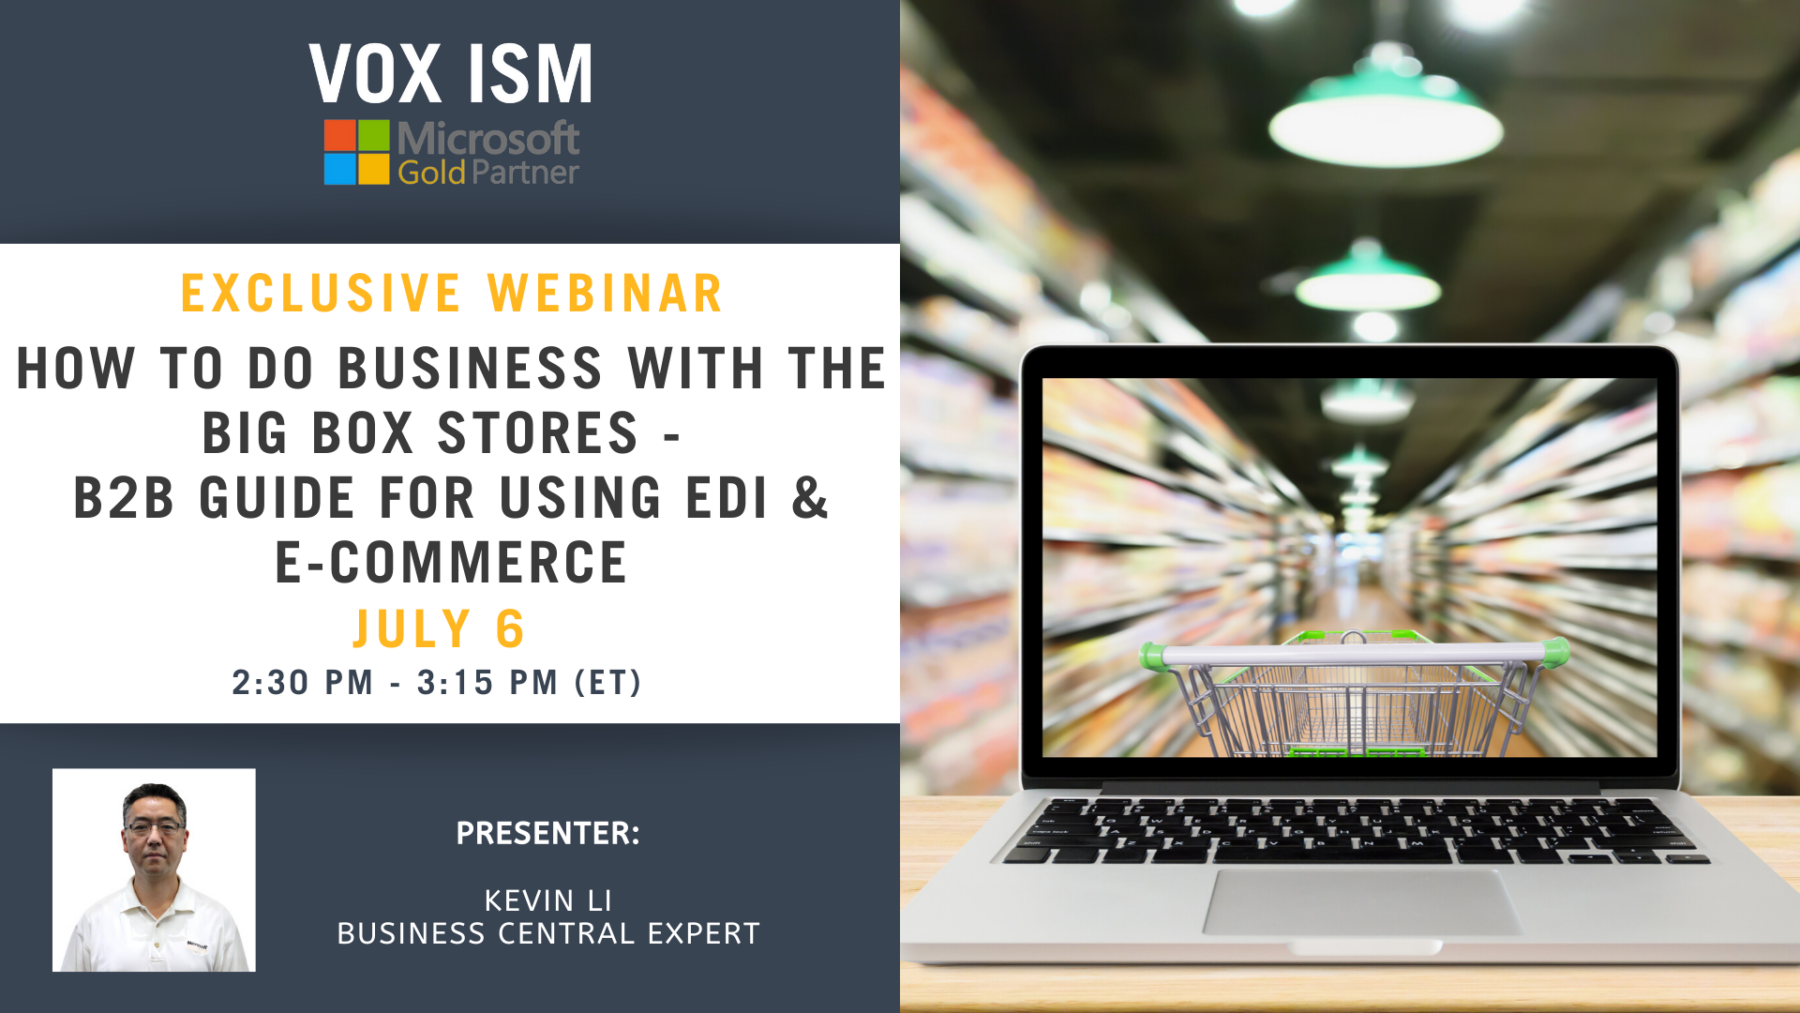 How to do business with the big box stores - B2B Guide for Using EDI & e-Commerce - July 6 - Webinar - VOX ISM